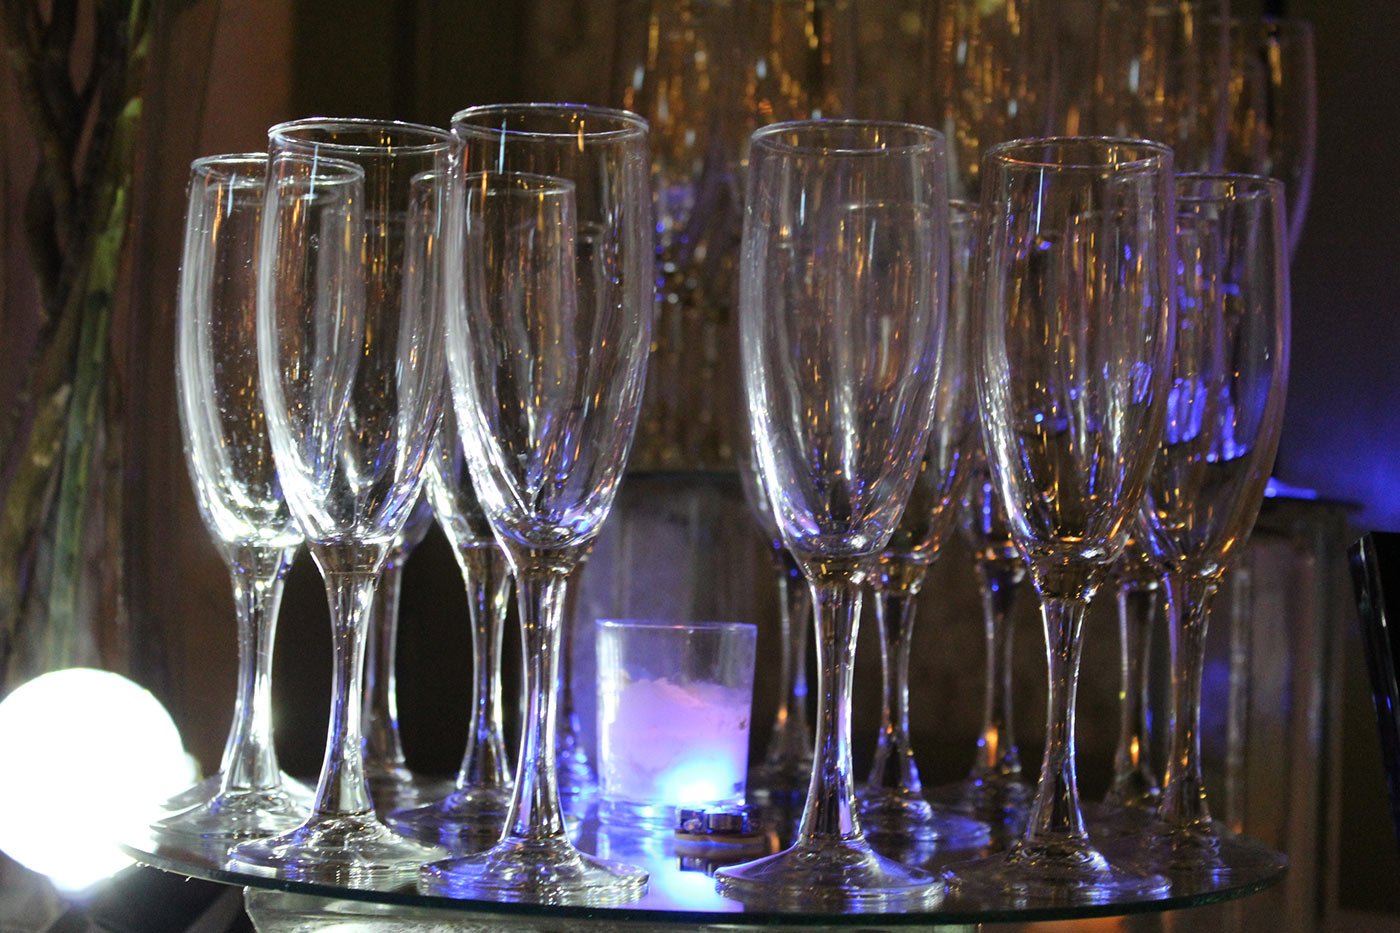 close up of the champagne tasting glasses